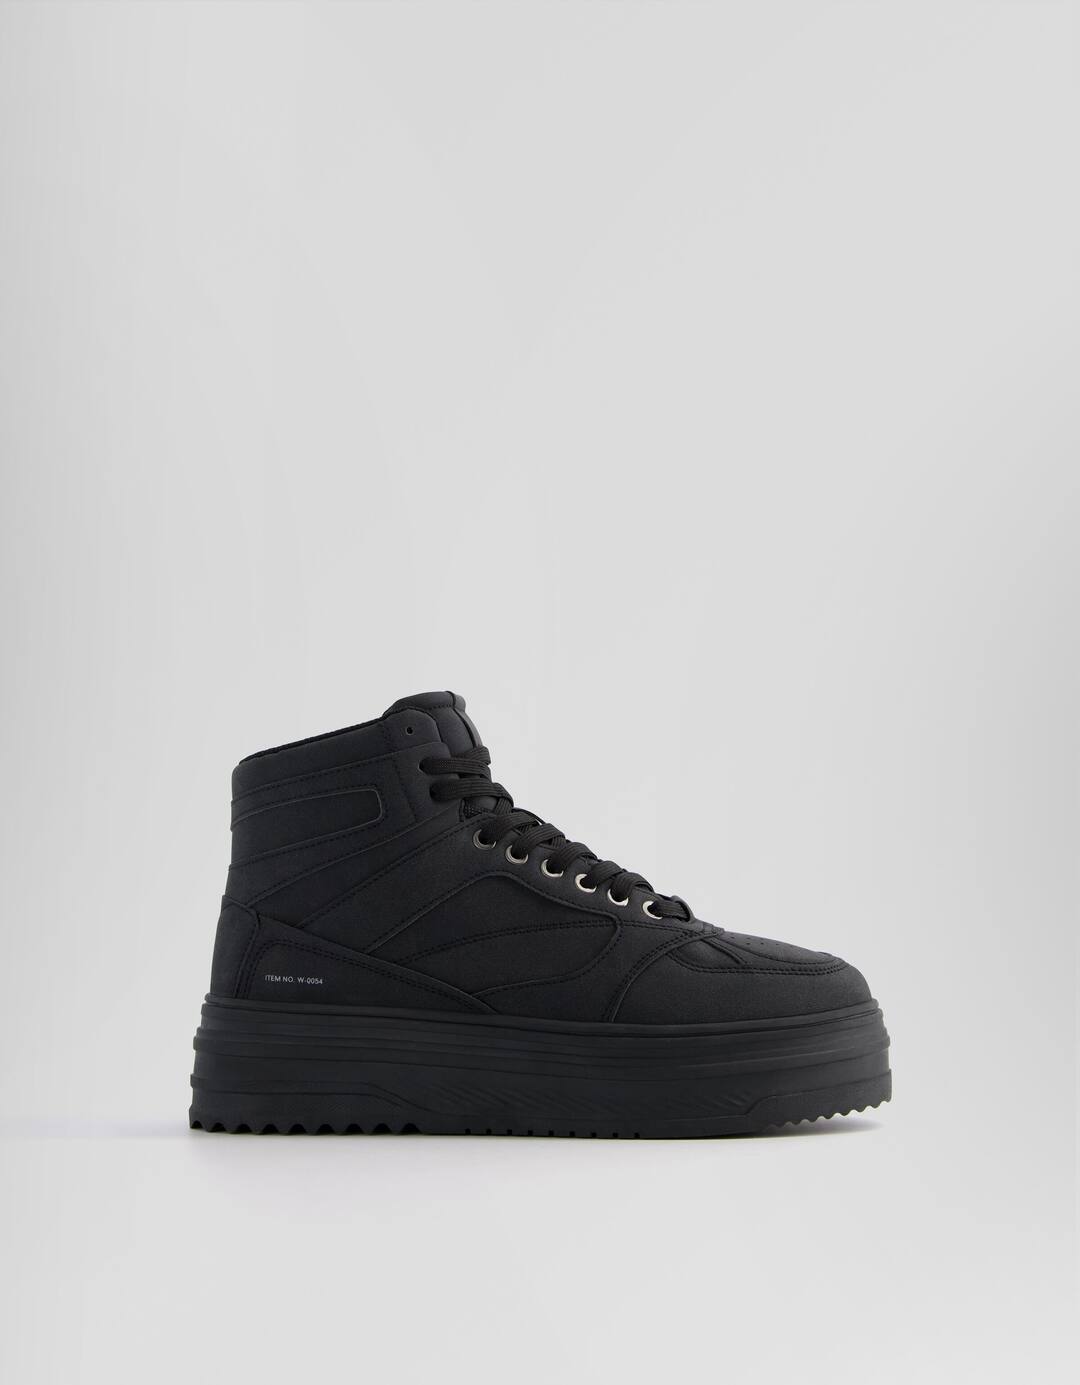 Men’s high-top trainers with thick soles